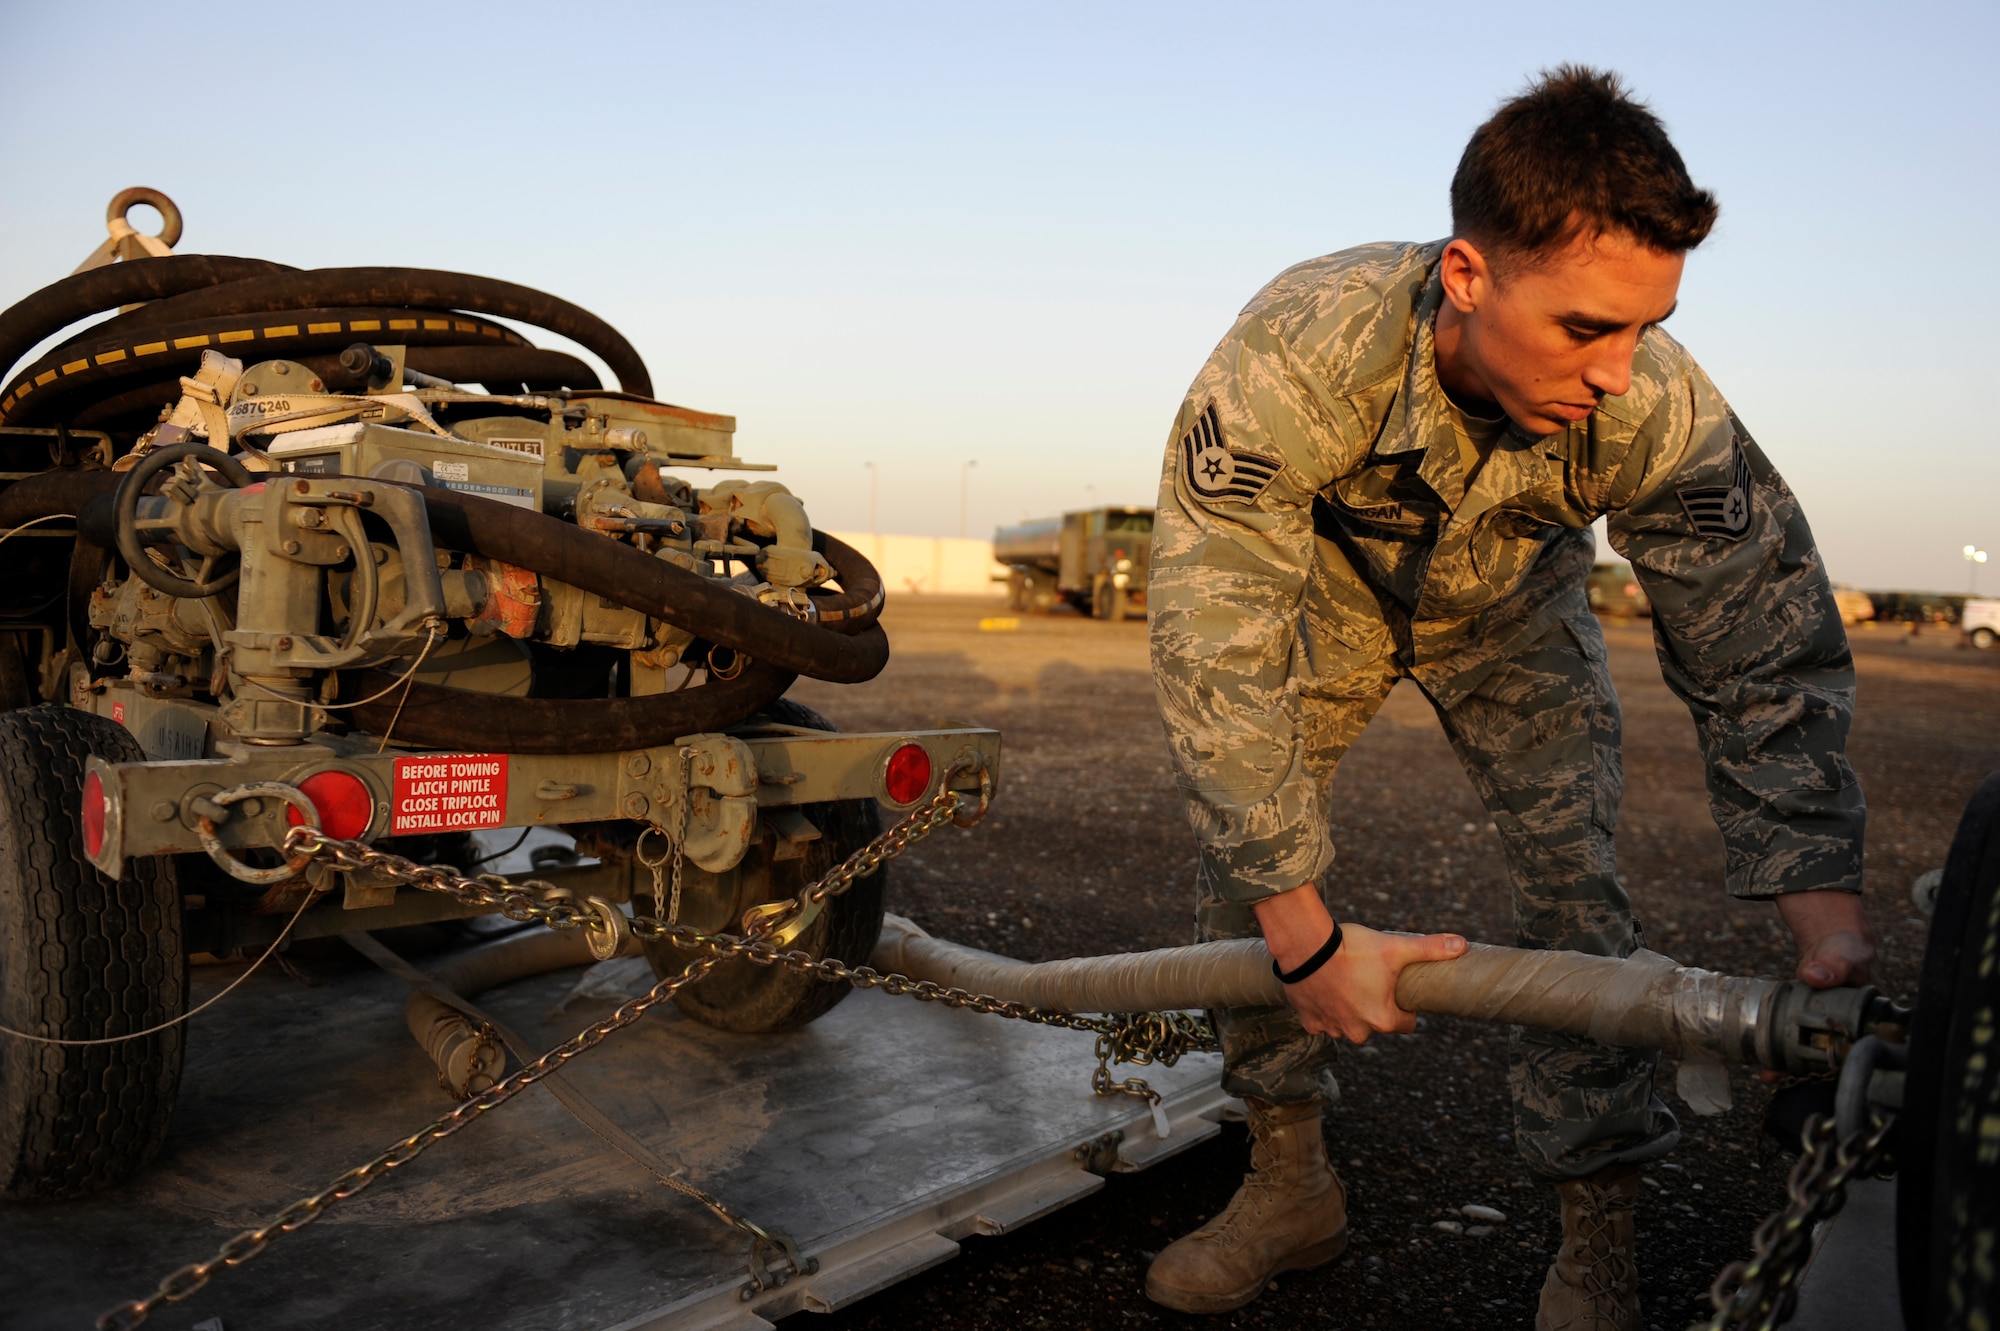 SOUTHWEST ASIA - Staff Sgt. Jason Morgan, 380th Expeditionary Logistics Readiness Squadron, fuels flight, connects a PMU-27 pump to a 500 gallon drum, April 4. The 500 gallon drum will be filled with thermally stable jet fuel. Sergeant Morgan and the fuel will be airlifted to an undisclosed location in Southwest Asia to facilitate the refueling of two U-2 Dragonlady's that were diverted because of poor weather conditions. Sergeant Morgan is deployed from Nellis AFB, Nev. and hails from Buffalo, N.Y. (U.S. Air Force photo by Senior Airman Brian J. Ellis) (Released)